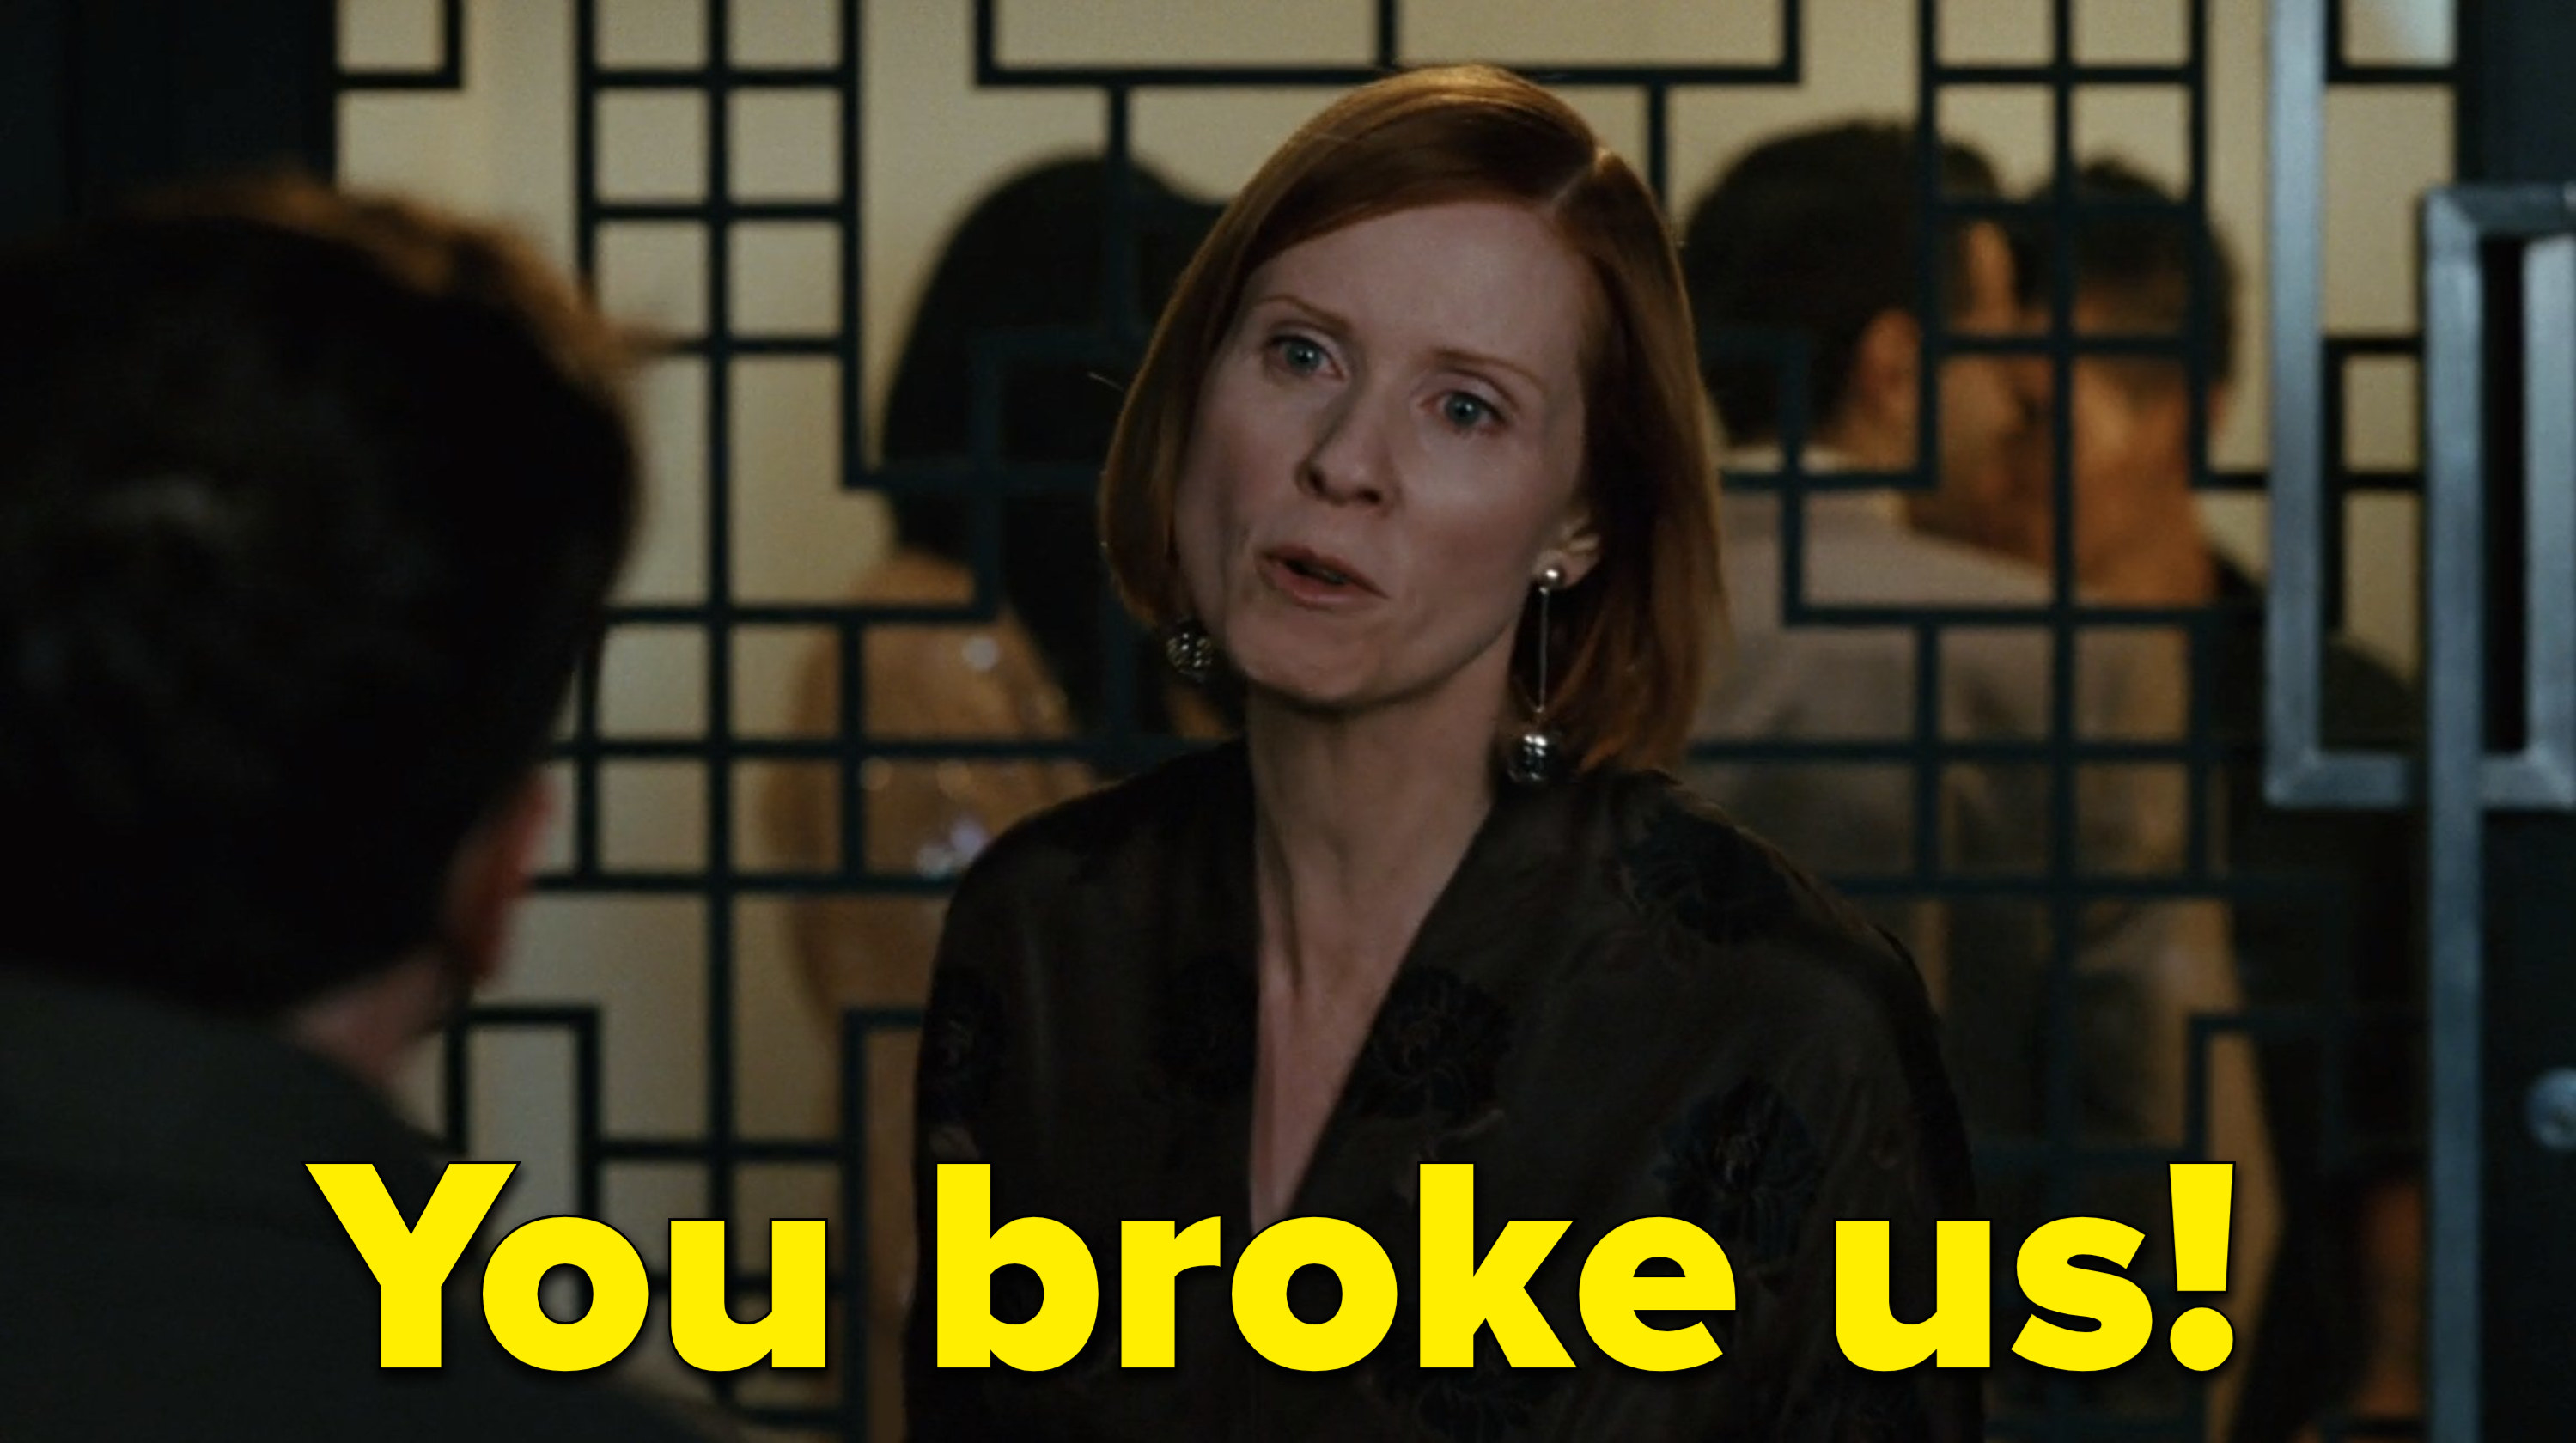 Miranda in Sex and the City saying &quot;You broke us!&quot;